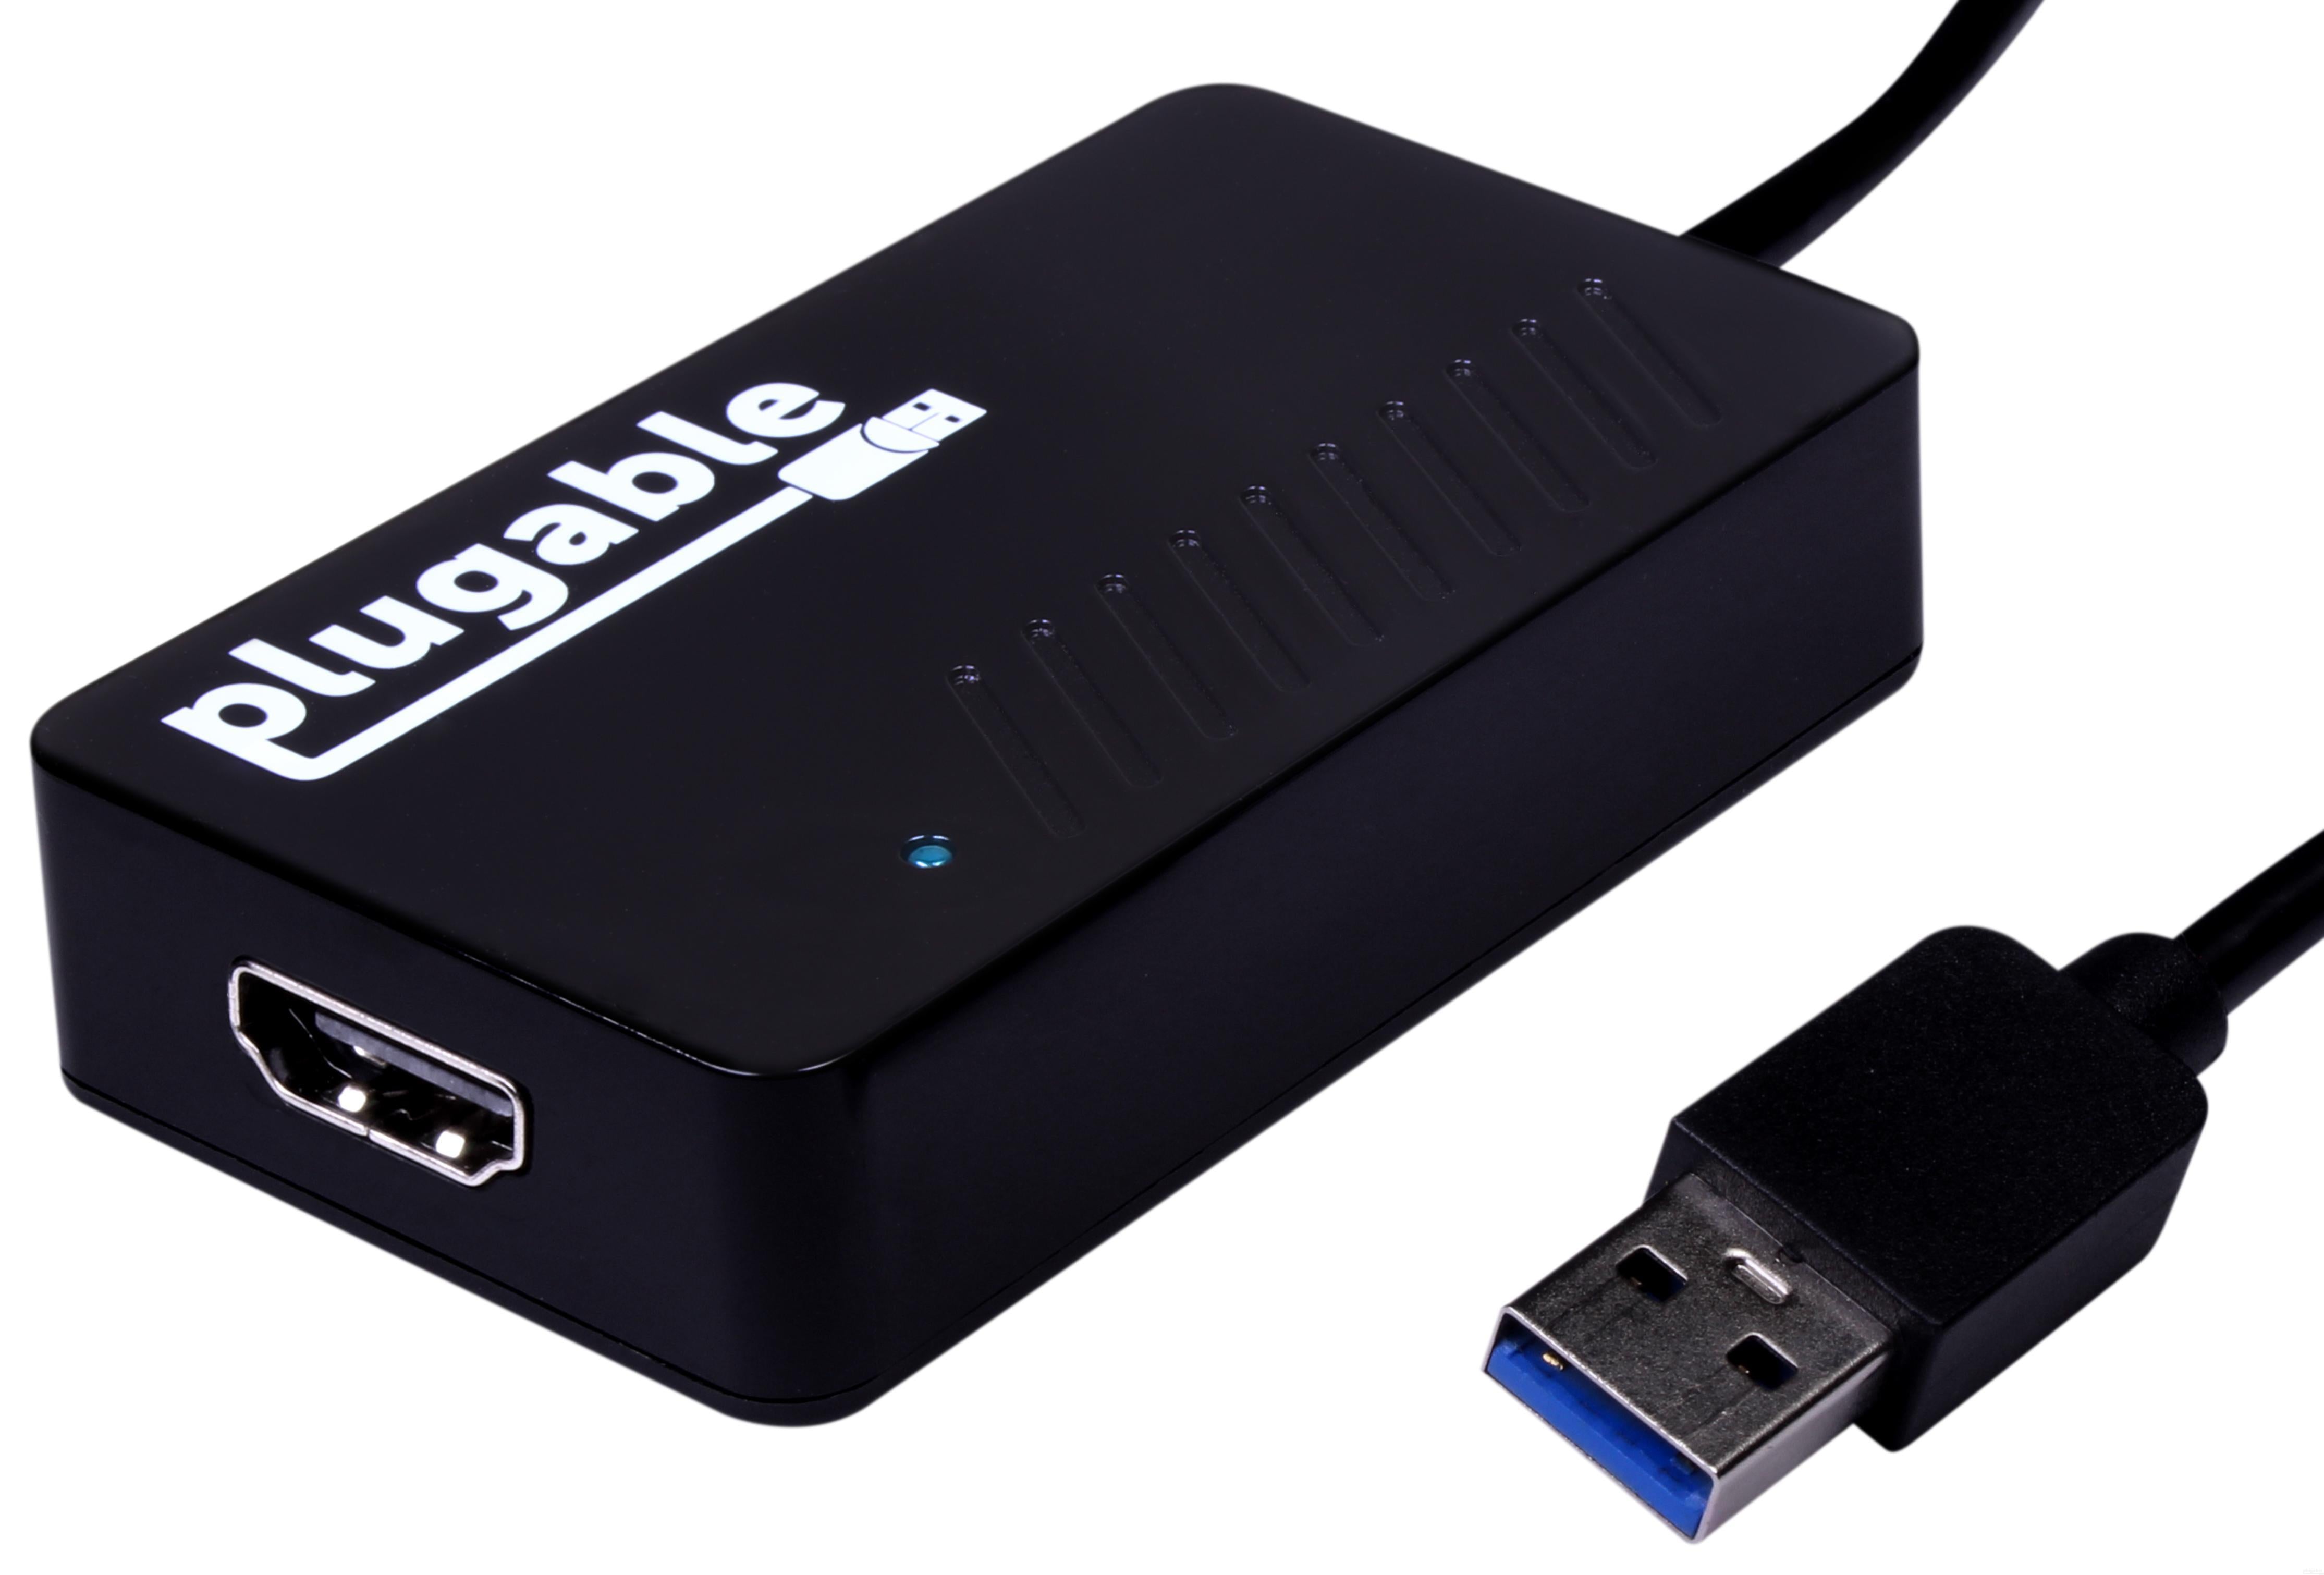 Thunderbolt 3 to Dual HDMI Adapter - 4K - Thunderbolt Display Adapters, Display & Video Adapters